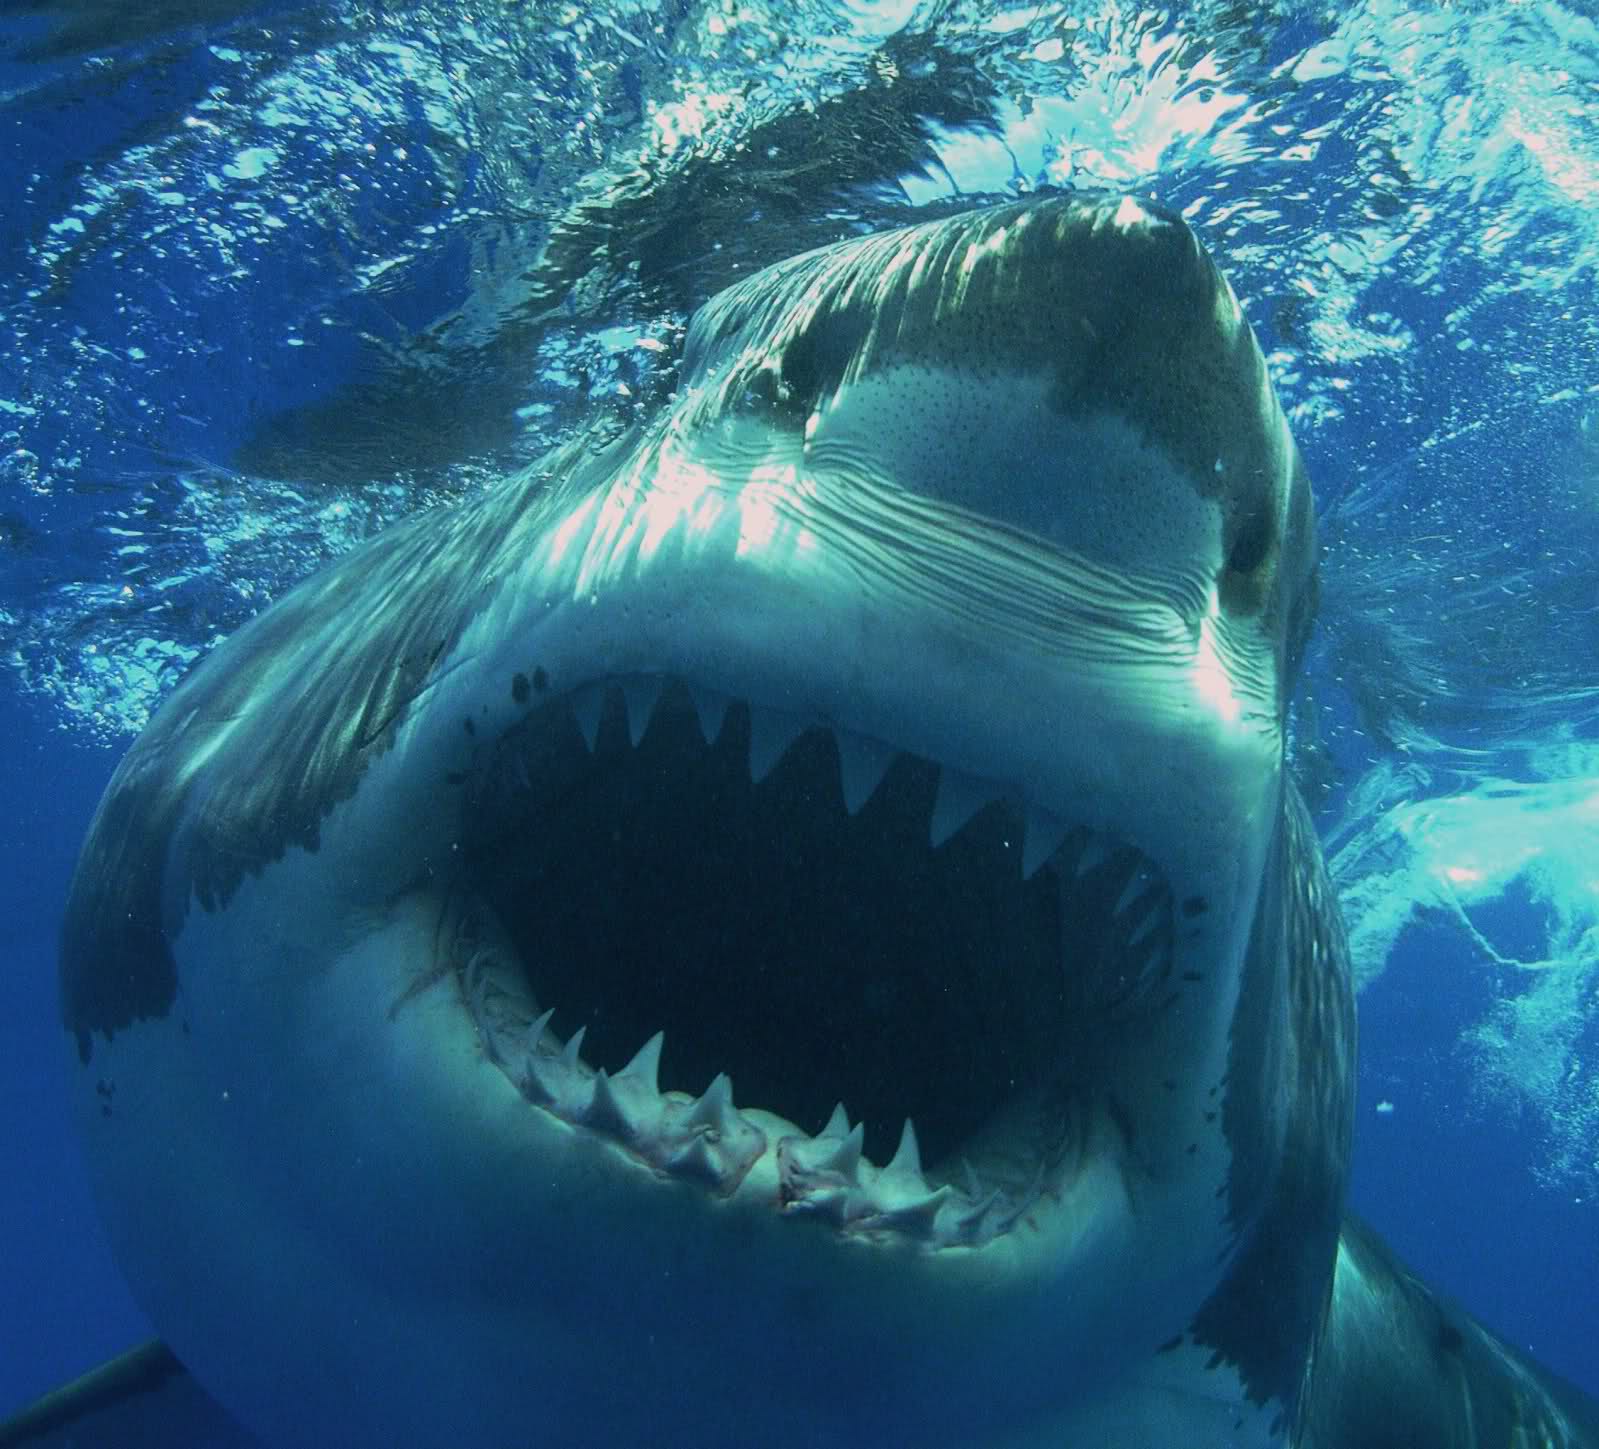 Great White Shark Images 15857 Hd Wallpapers in Animals   Imagescicom 1599x1449